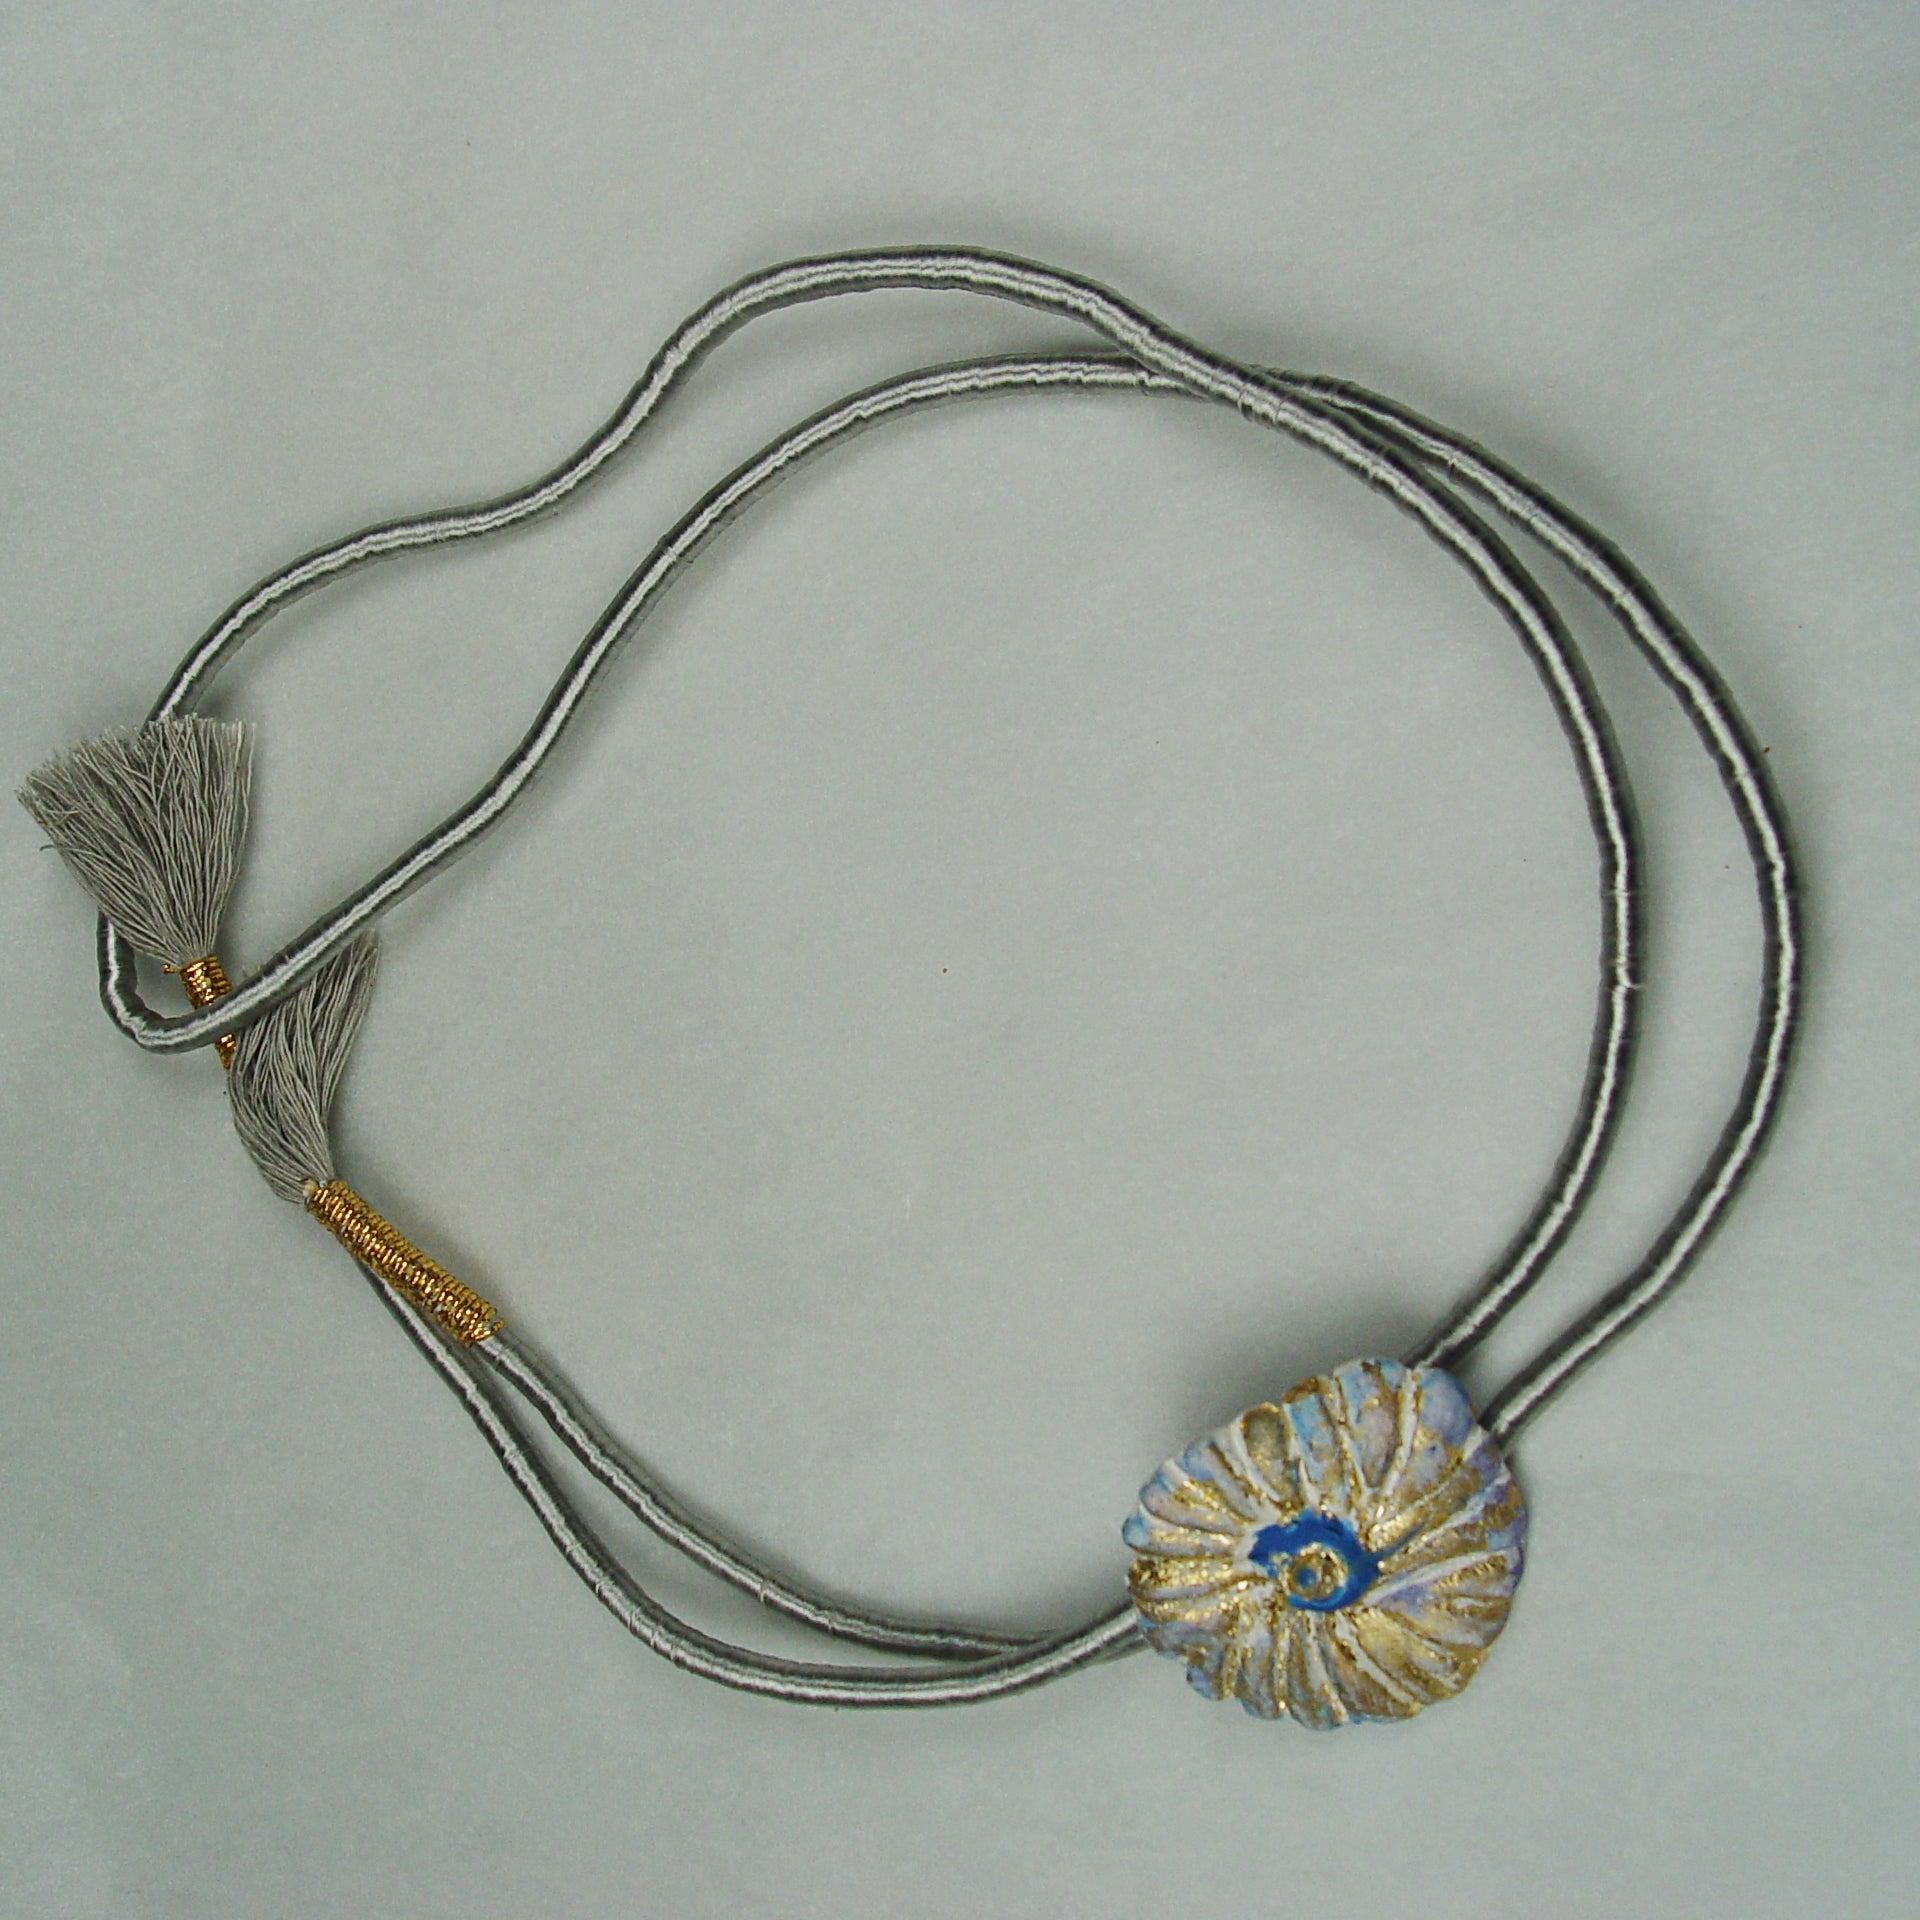 Thetis gilded flower necklace